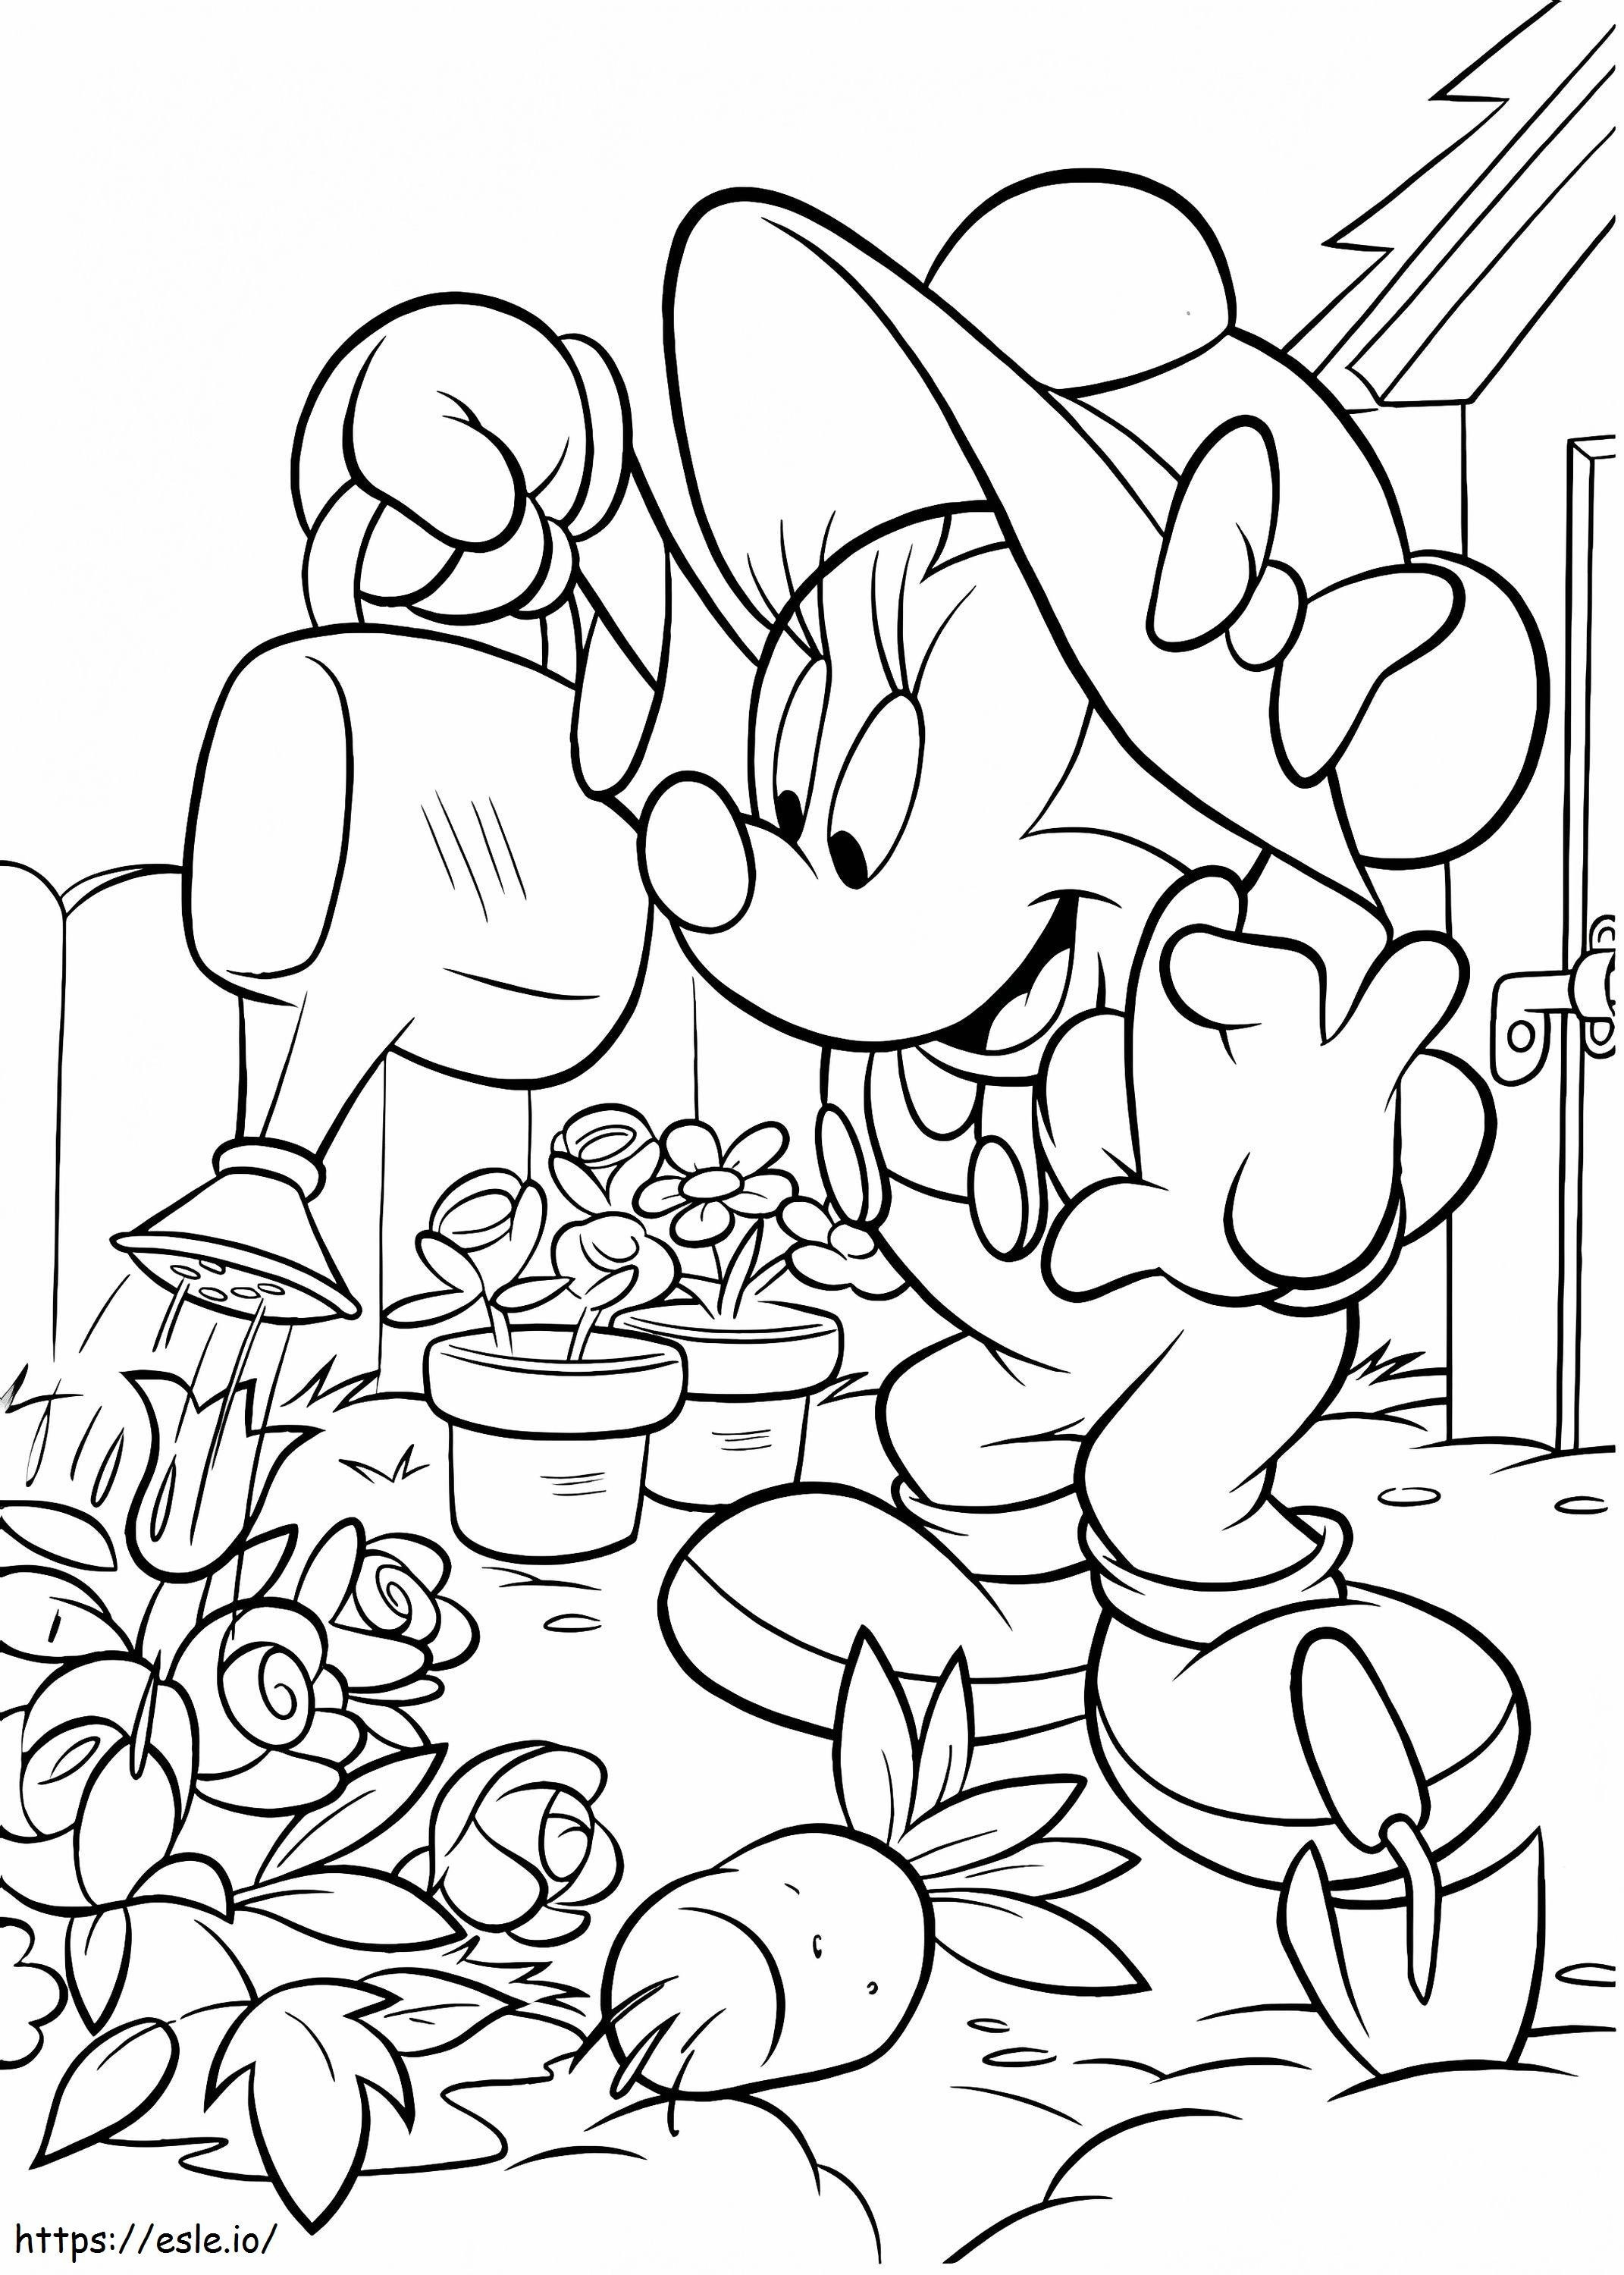 1534560747 Minnie Mouse Watering Flowers A4 coloring page